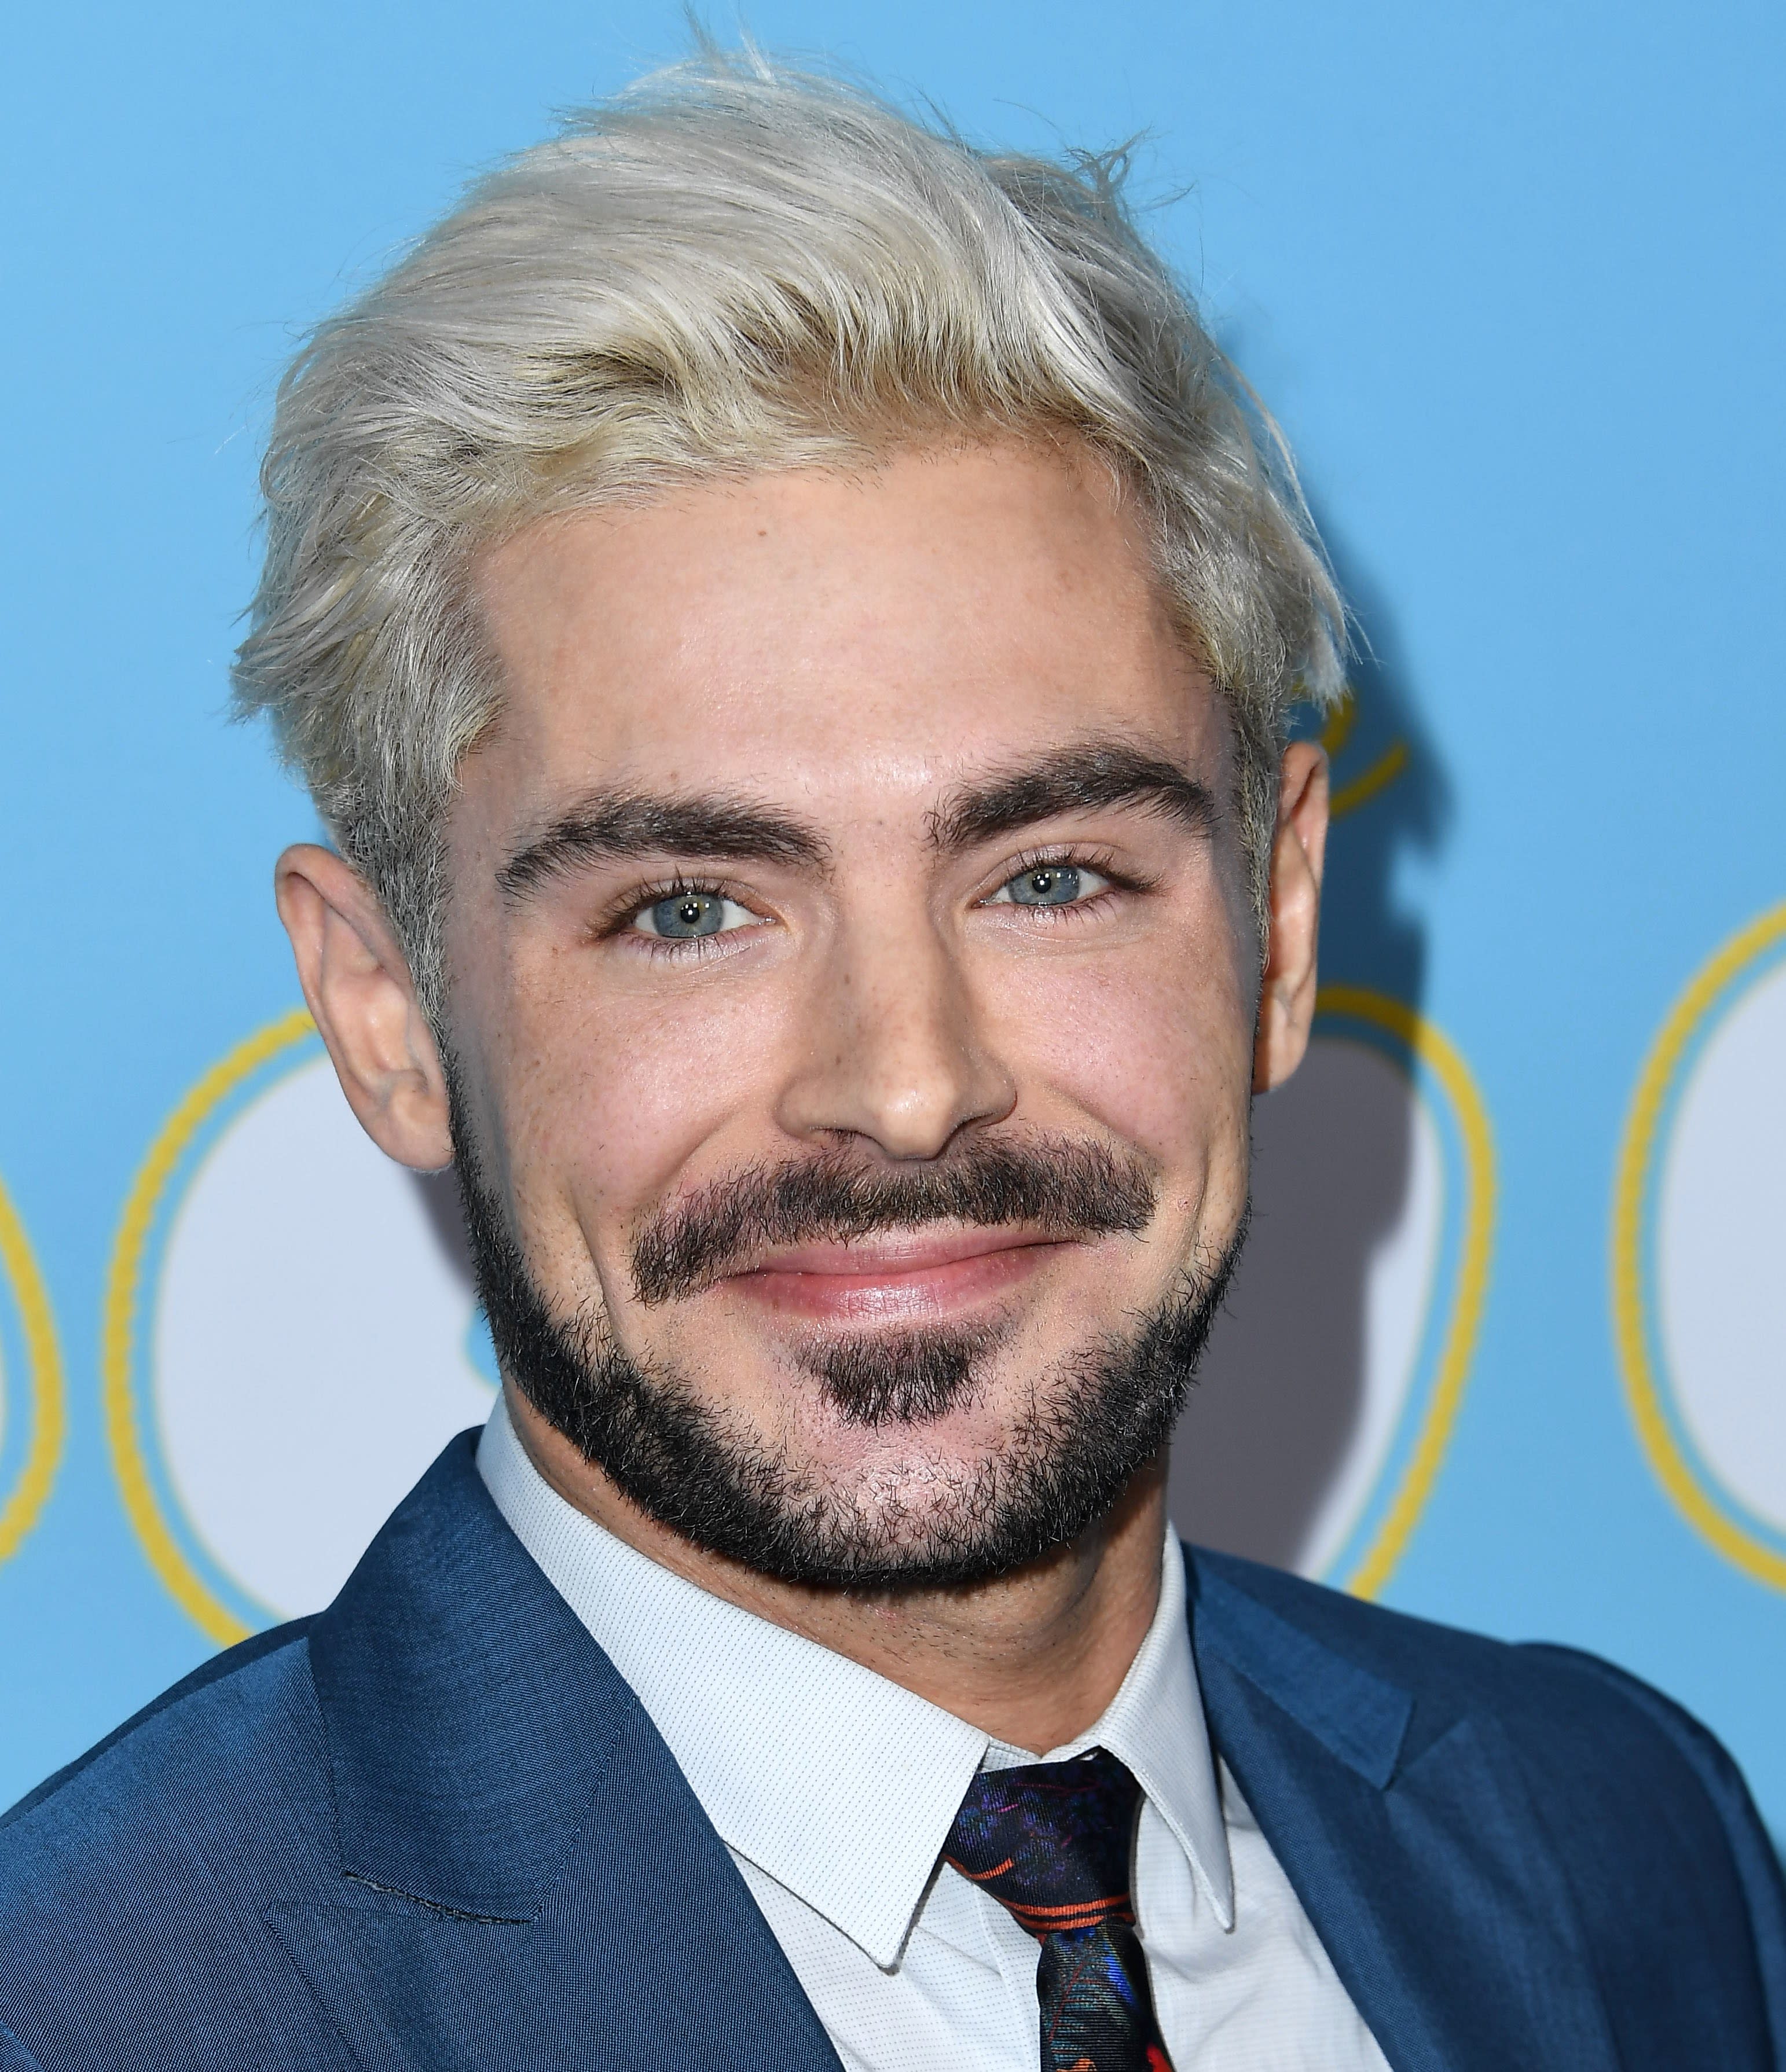 Zac Efron's Still Nailing the Whole Bleached Hair Thing